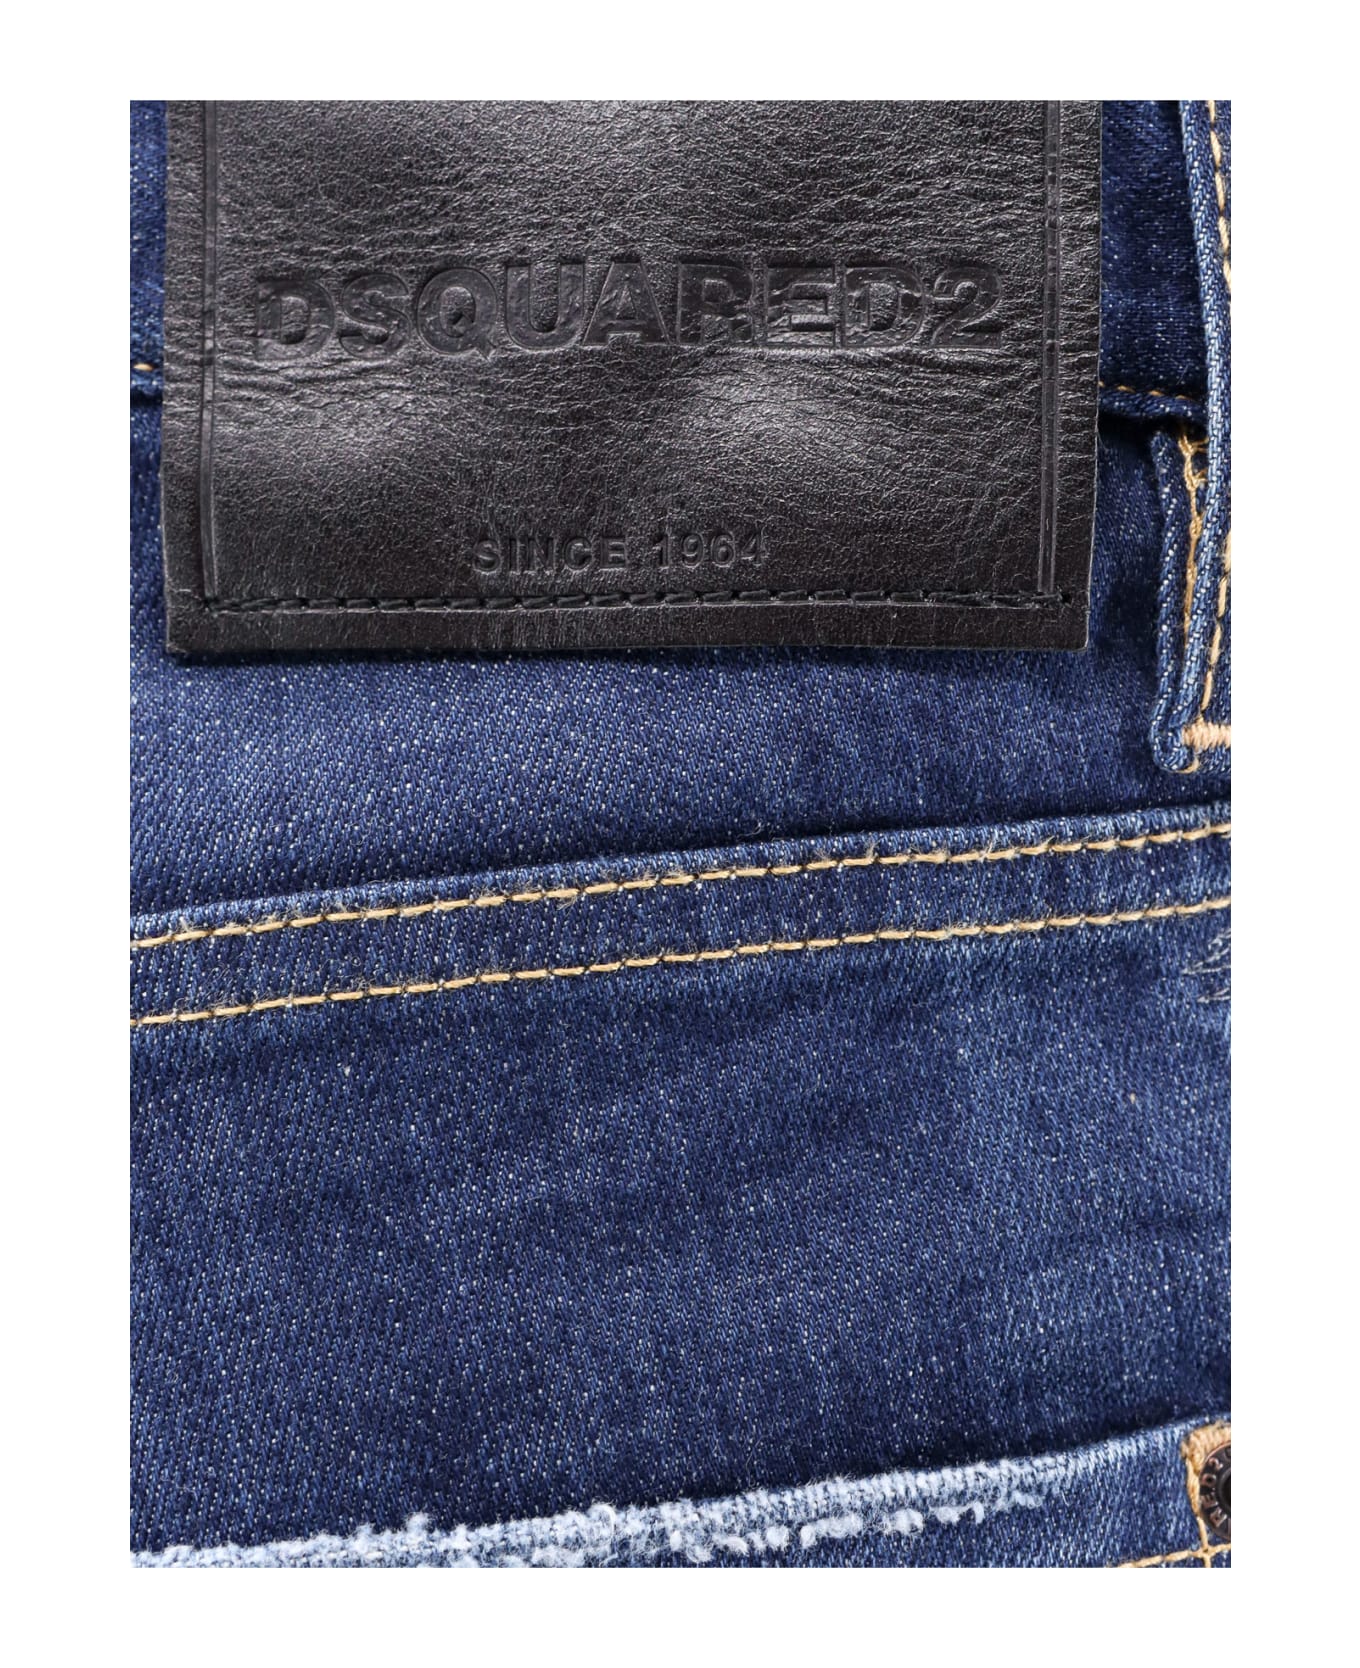 Dsquared2 Cool Guy Jean Jeans - Blue